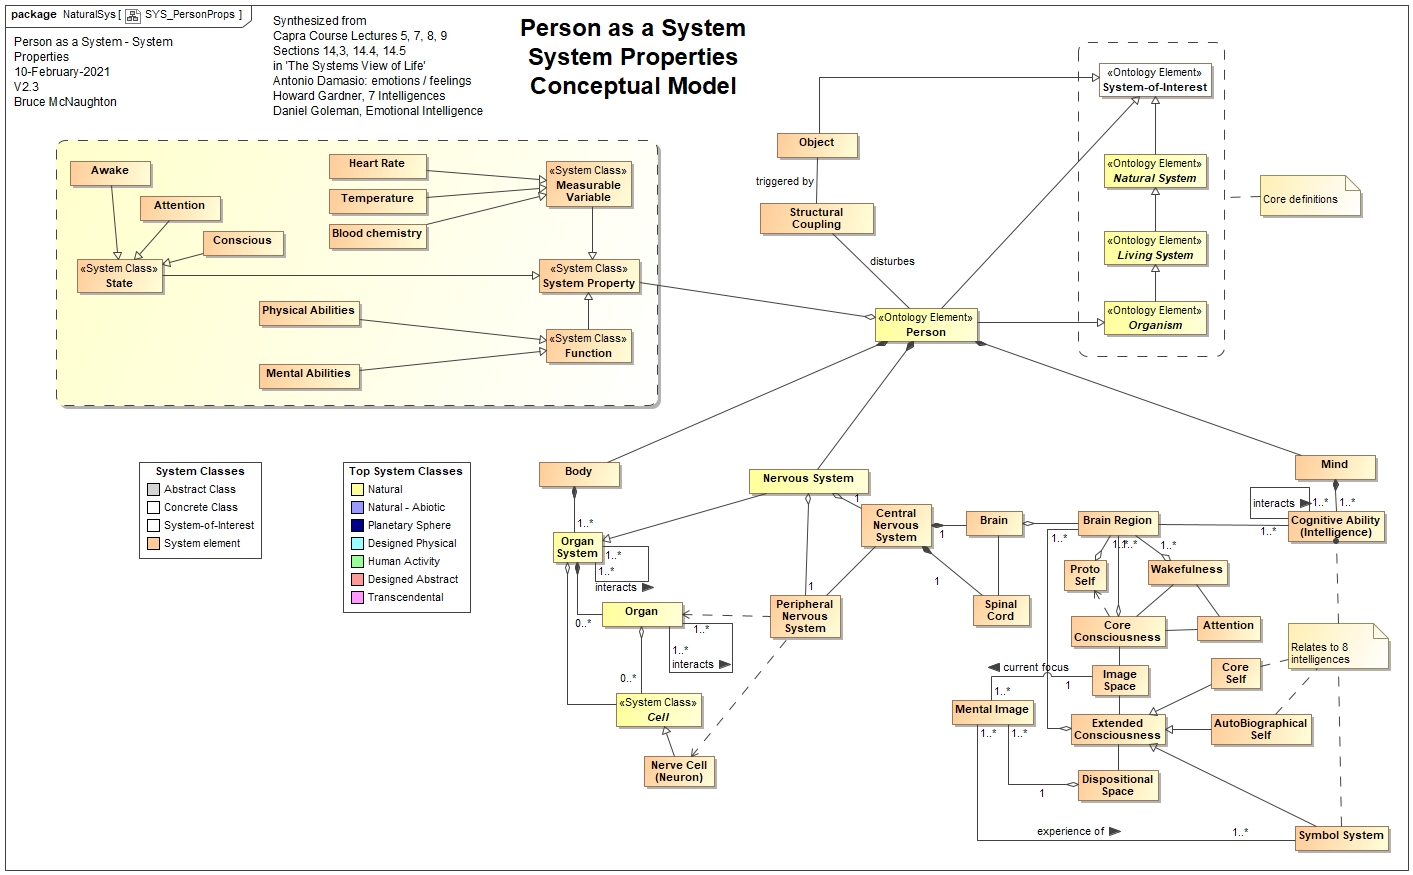 System Properties for a Person as a System